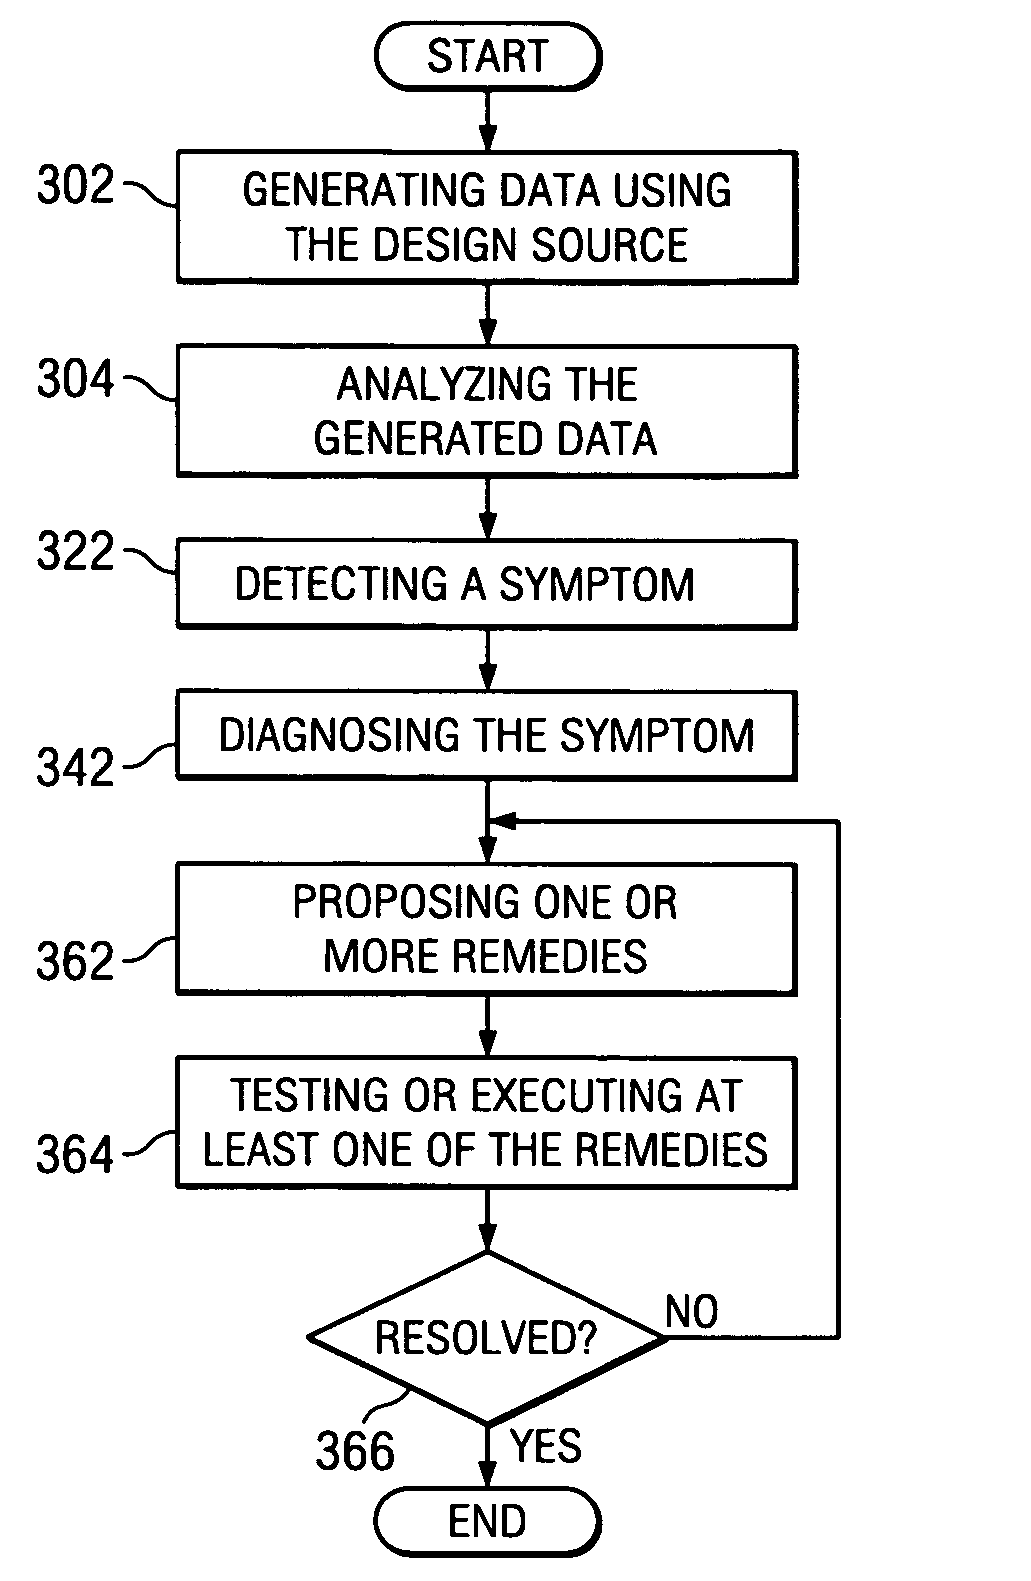 System and method for automated electronic device design